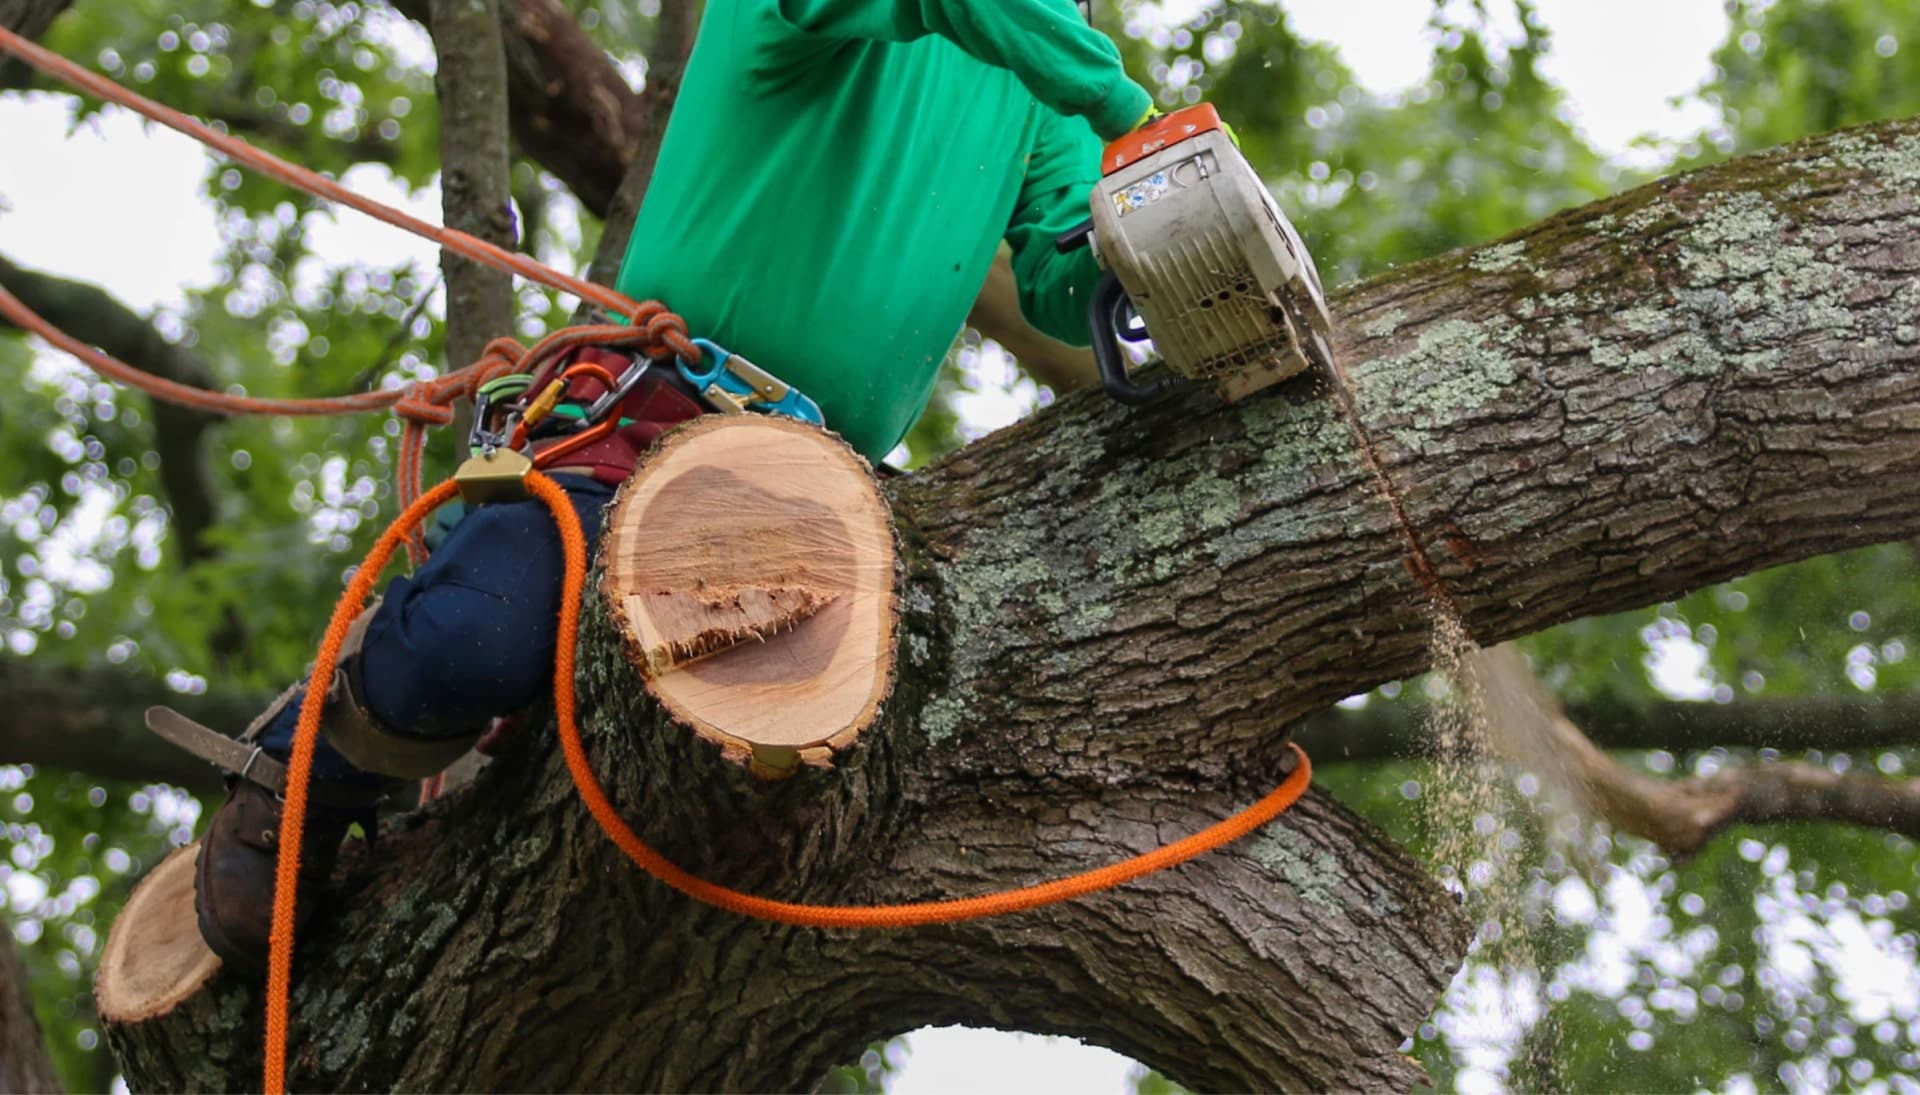 Shed your worries away with best tree removal in Reno